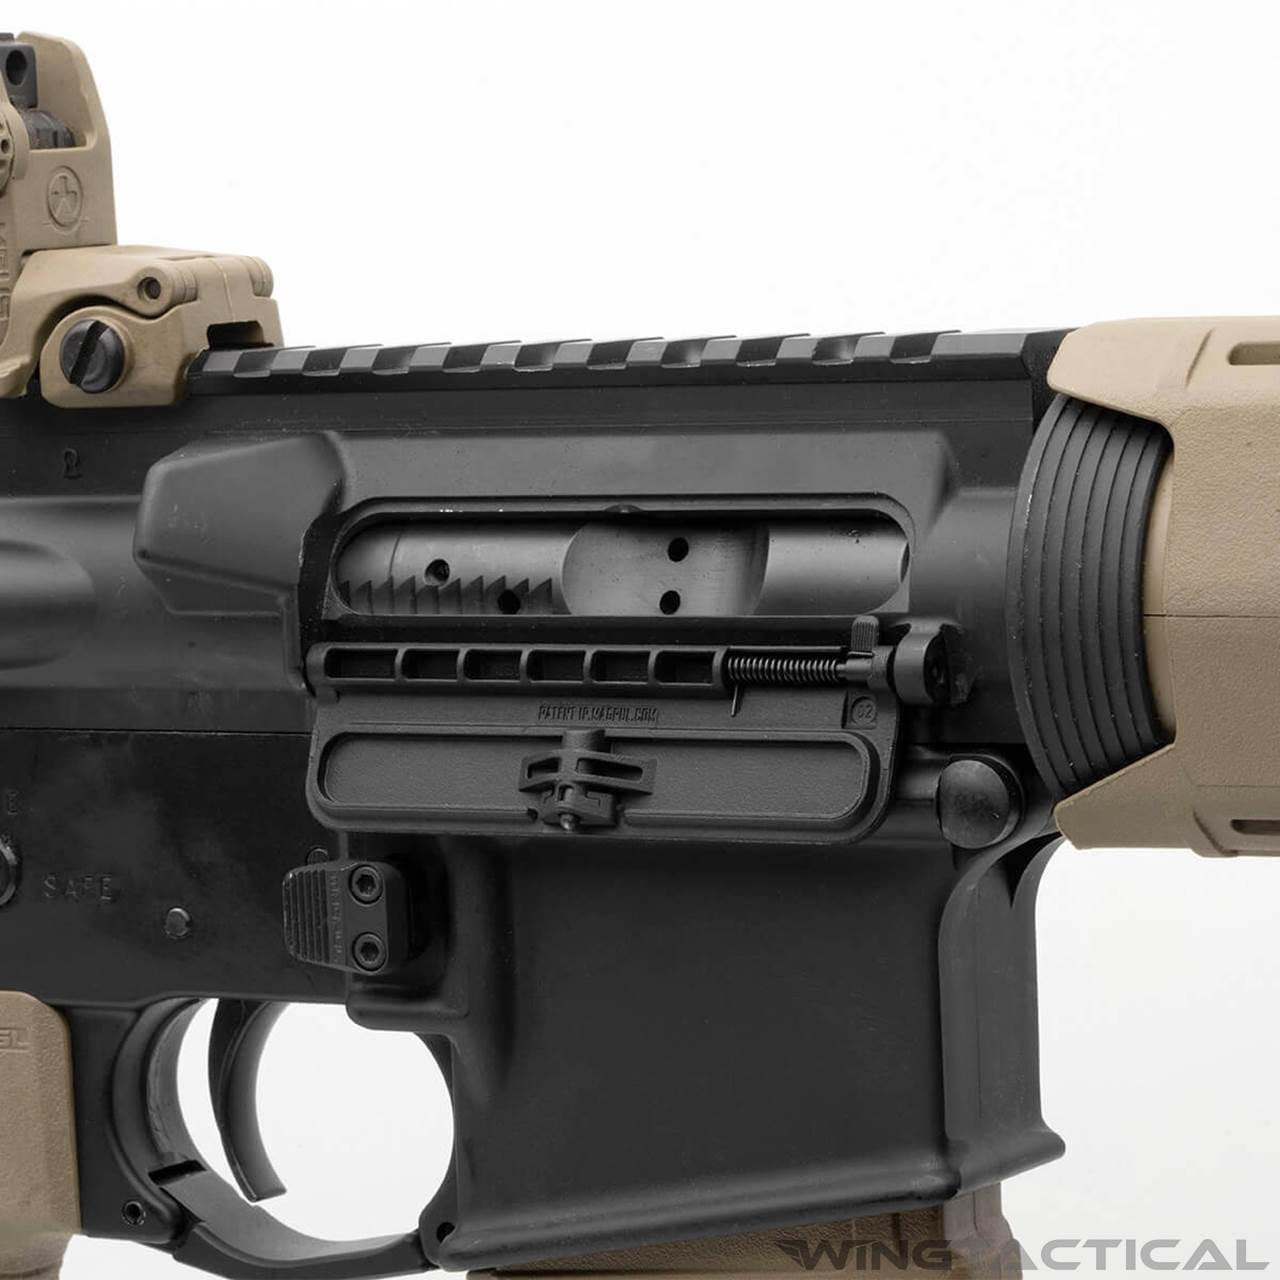 Magpul Enhanced Ejection Port Cover - ODG